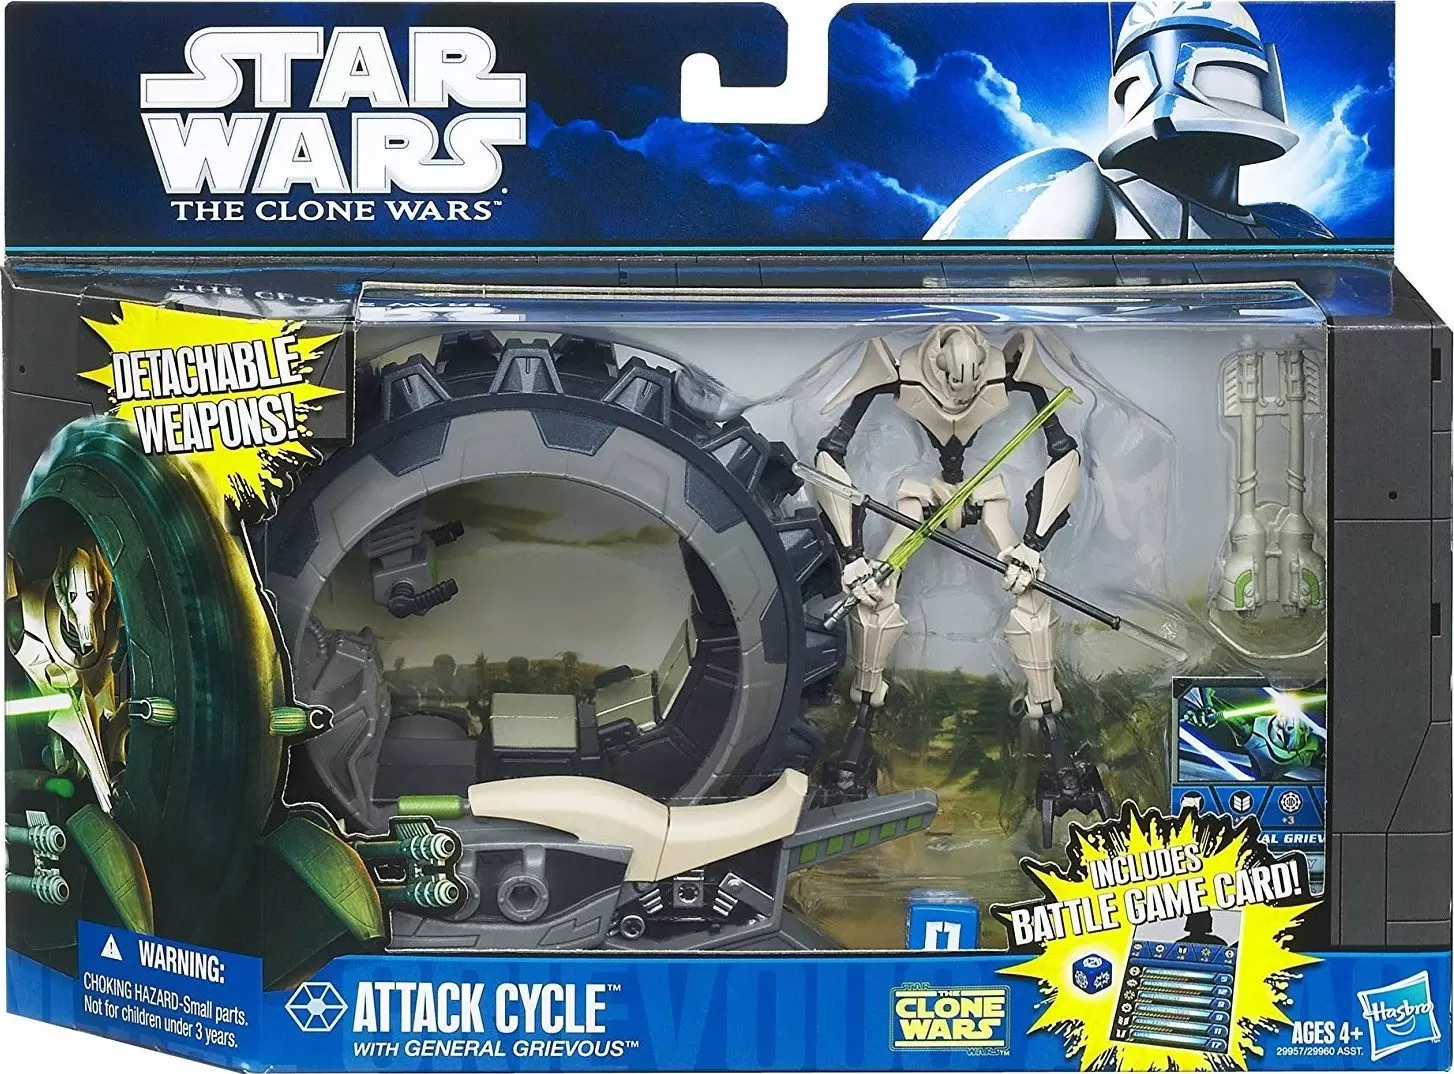 STARWARS スターウォーズ フィギュア ATTACK CYCLE WITH GENERAL 